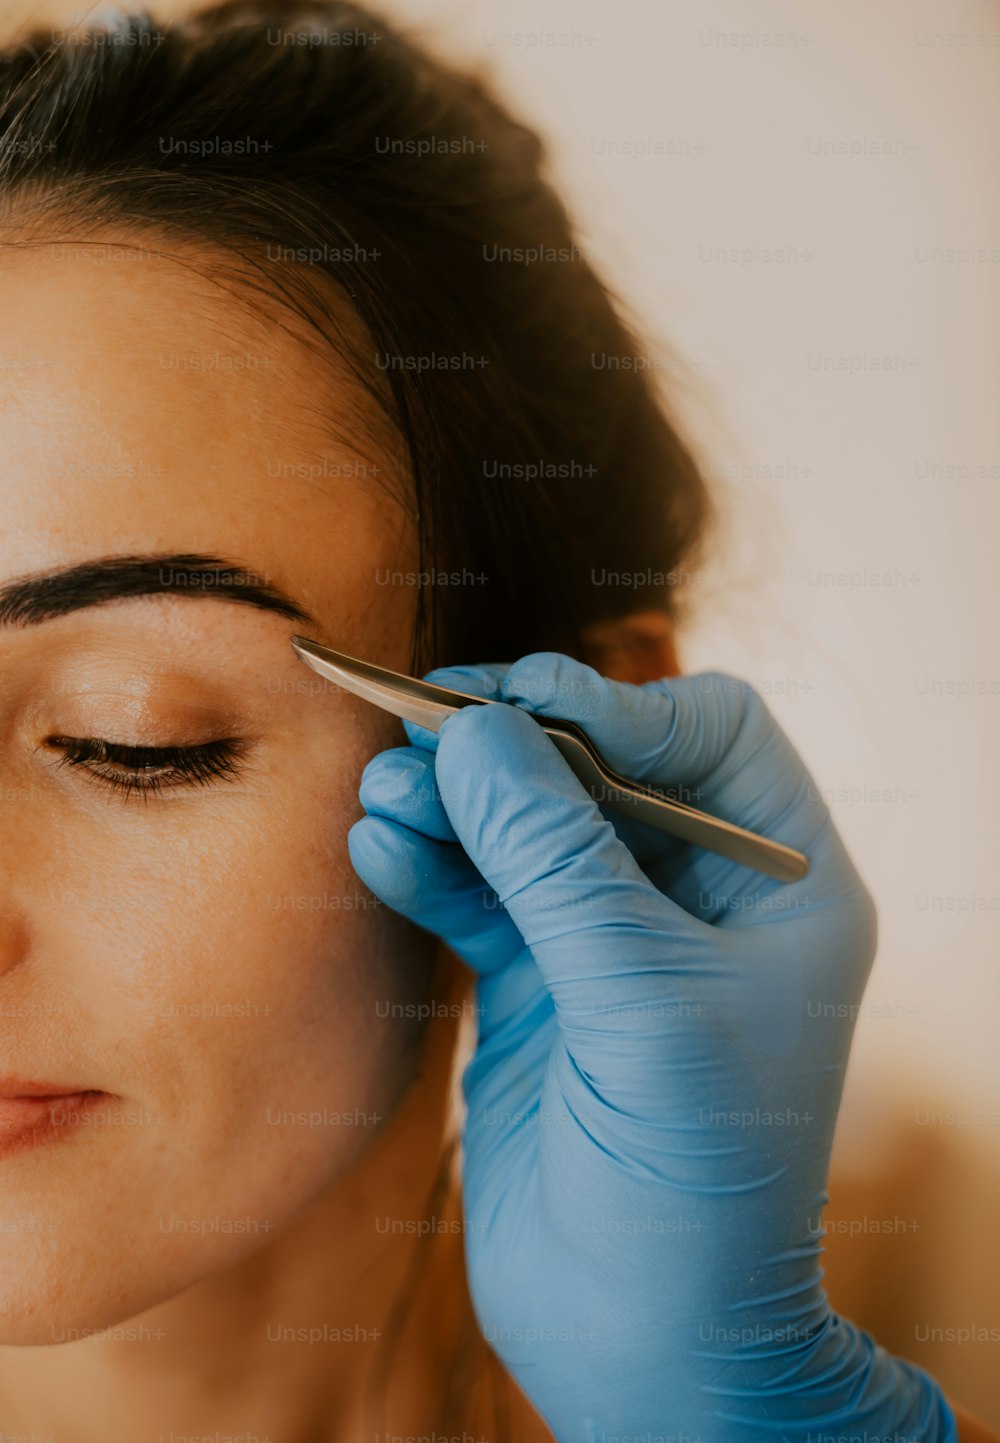 a woman getting her eyebrows done with a pair of scissors